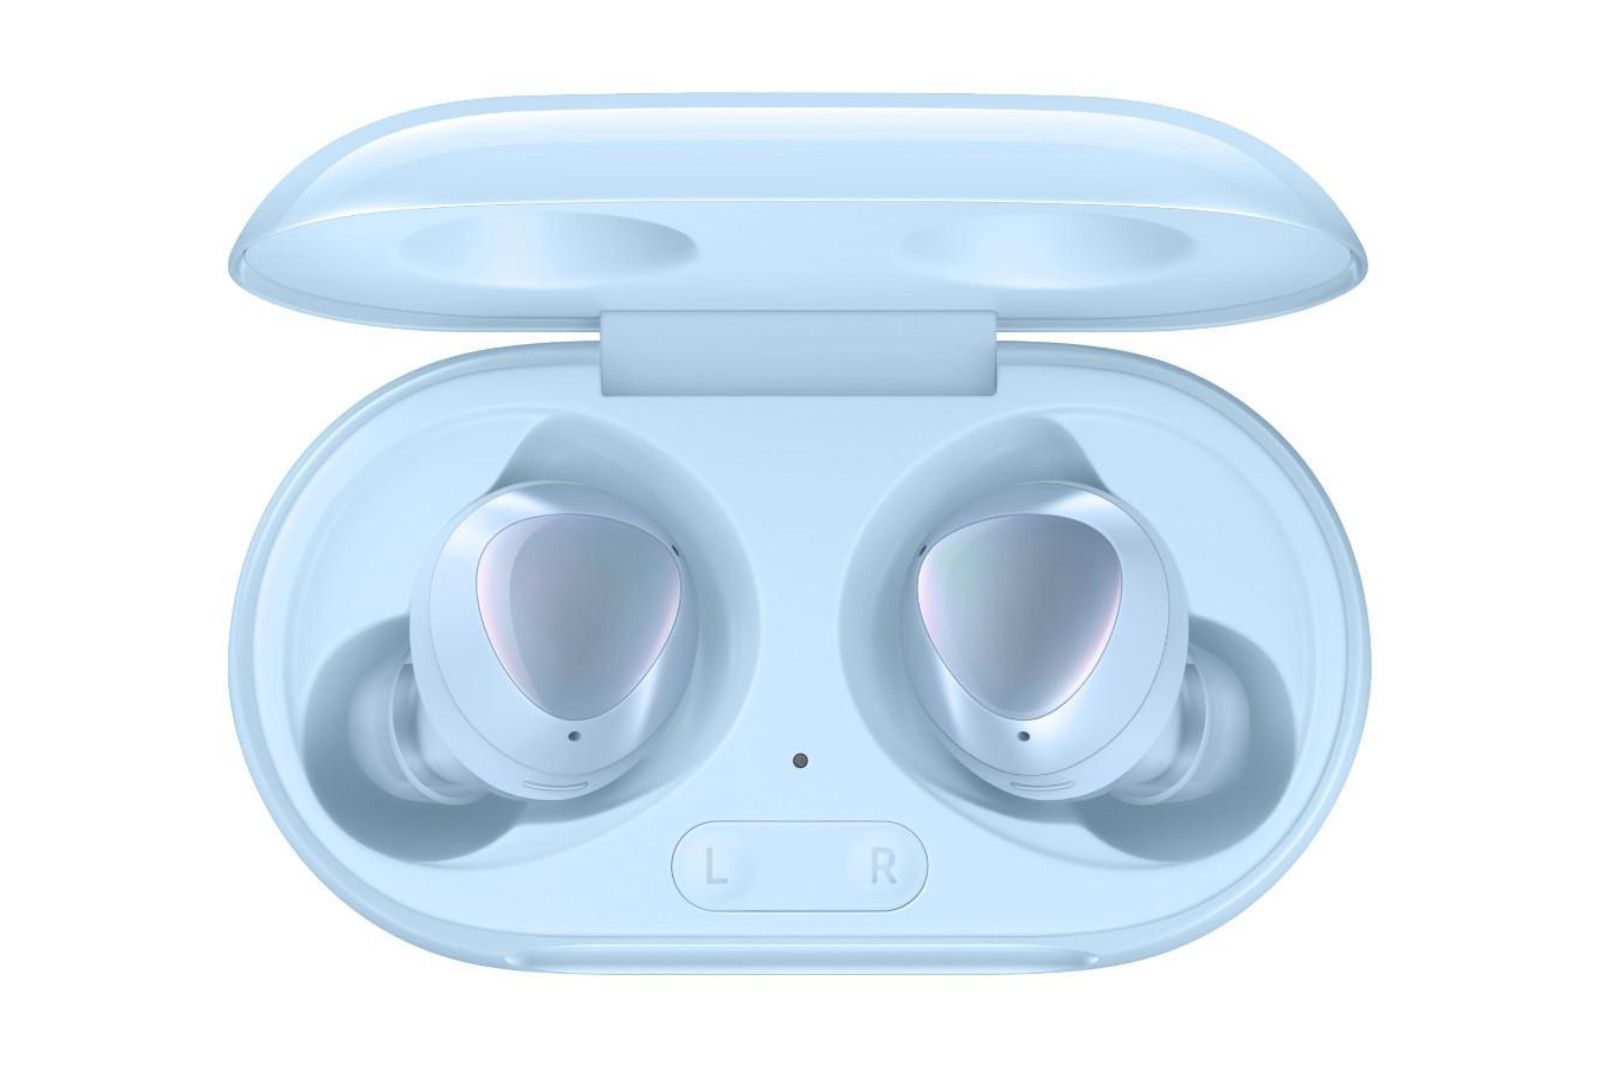 Samsung Galaxy Buds Bring Better Battery Life image 1